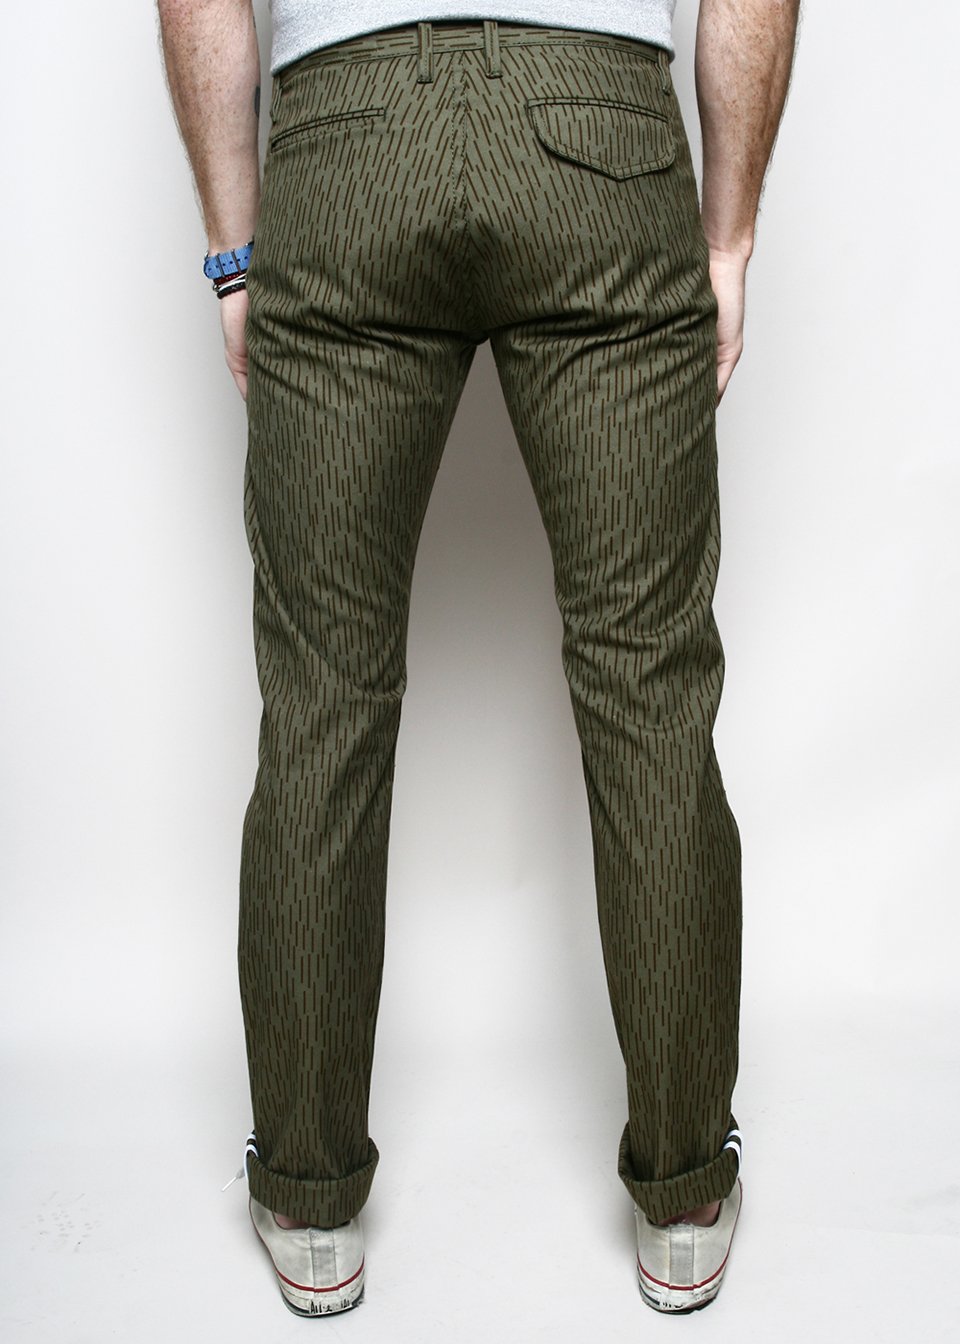 Raindrop Camo Officer Trousers